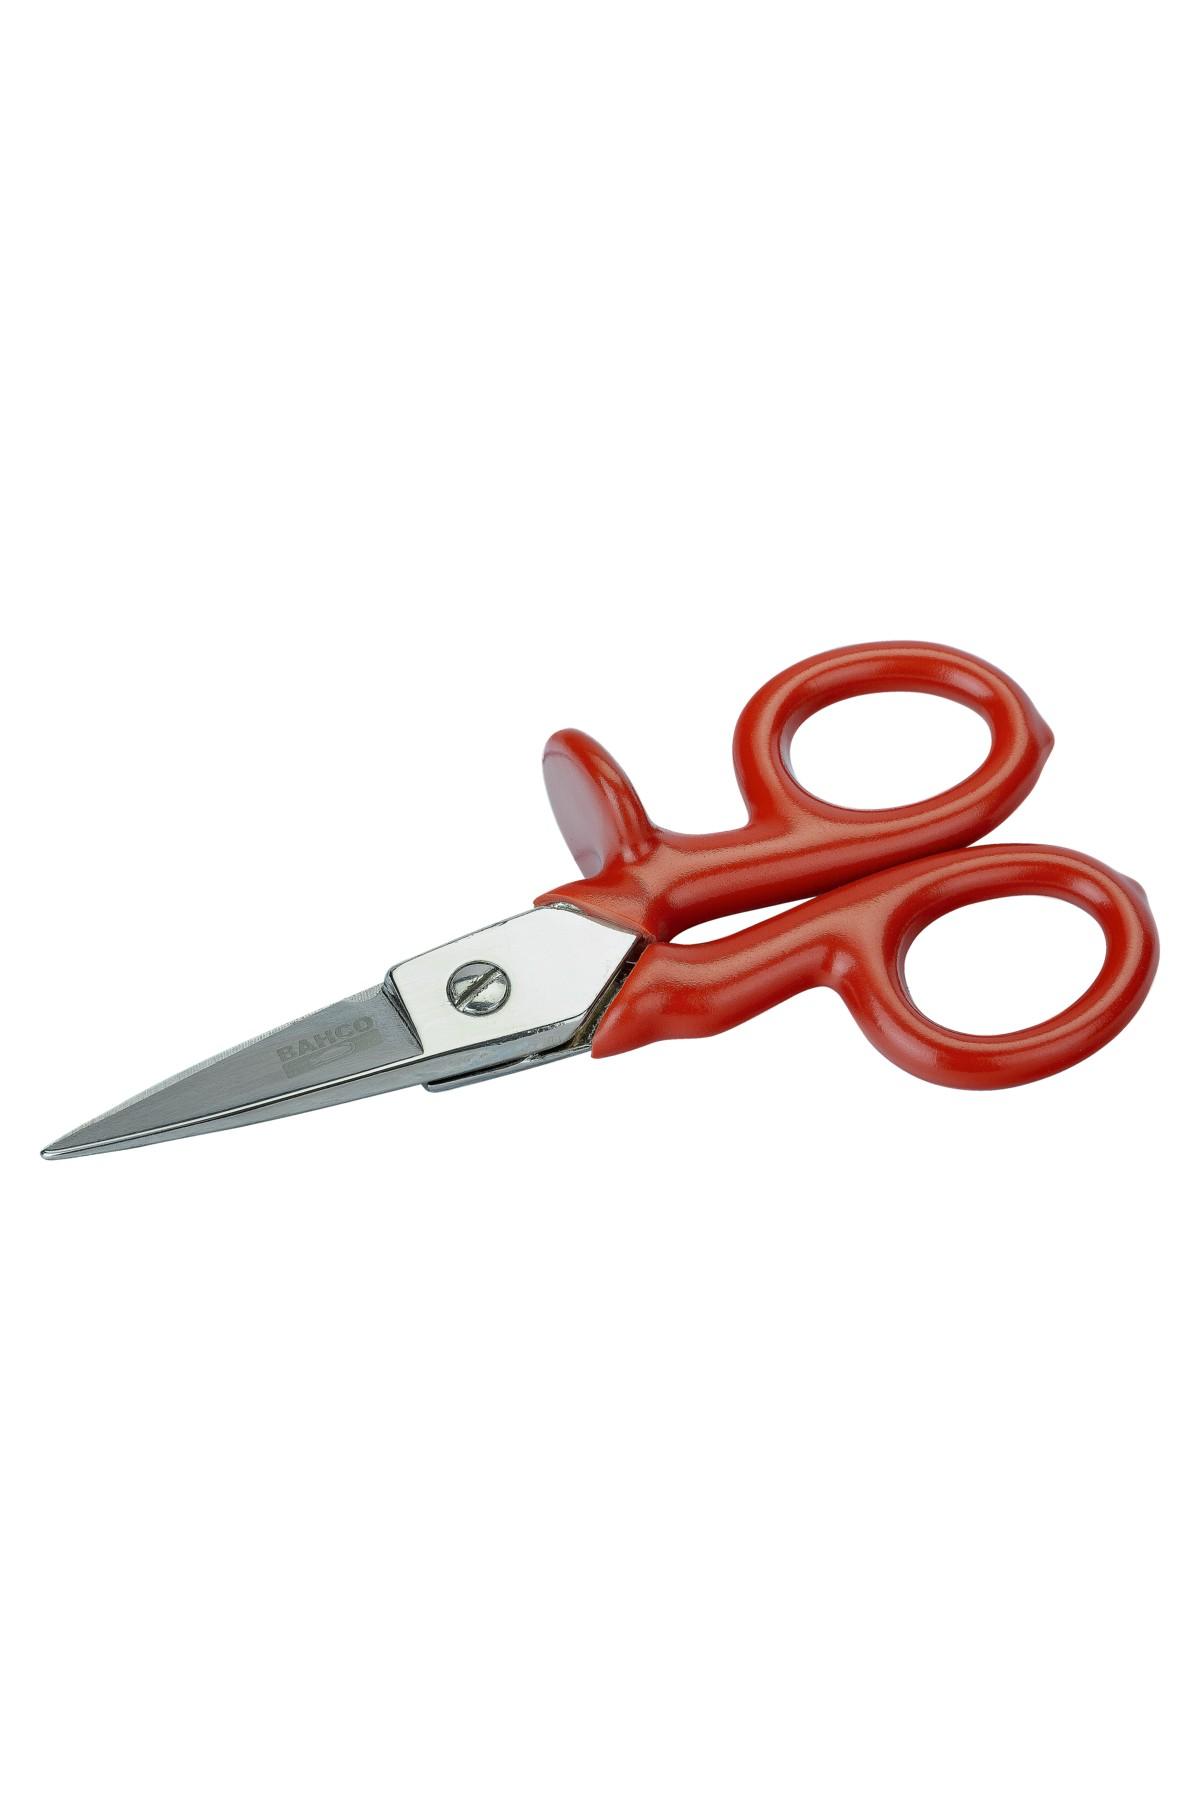 VDE-Insulated electrician's scissors with finger protection